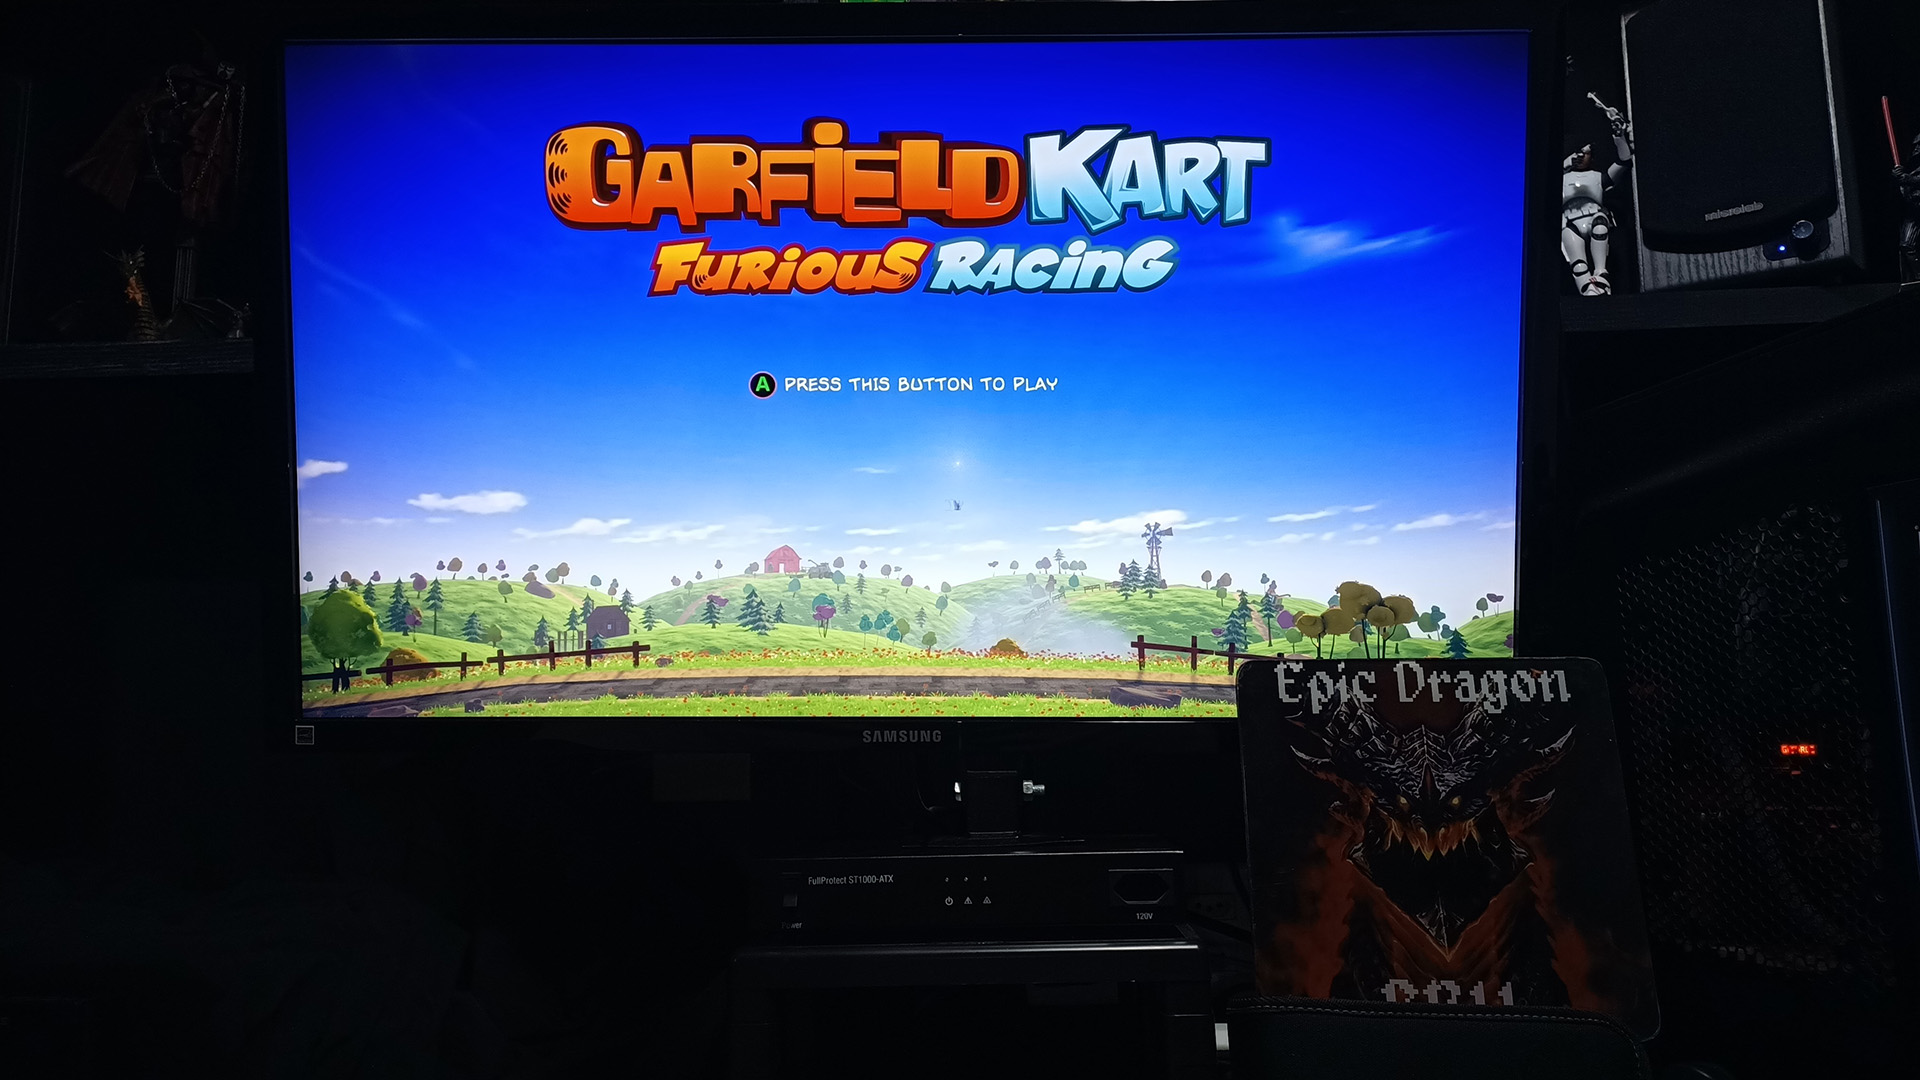 Garfield Kart Furious Racing: Prohibited Site [Time Trial: 3 Laps] time of 0:02:53.973